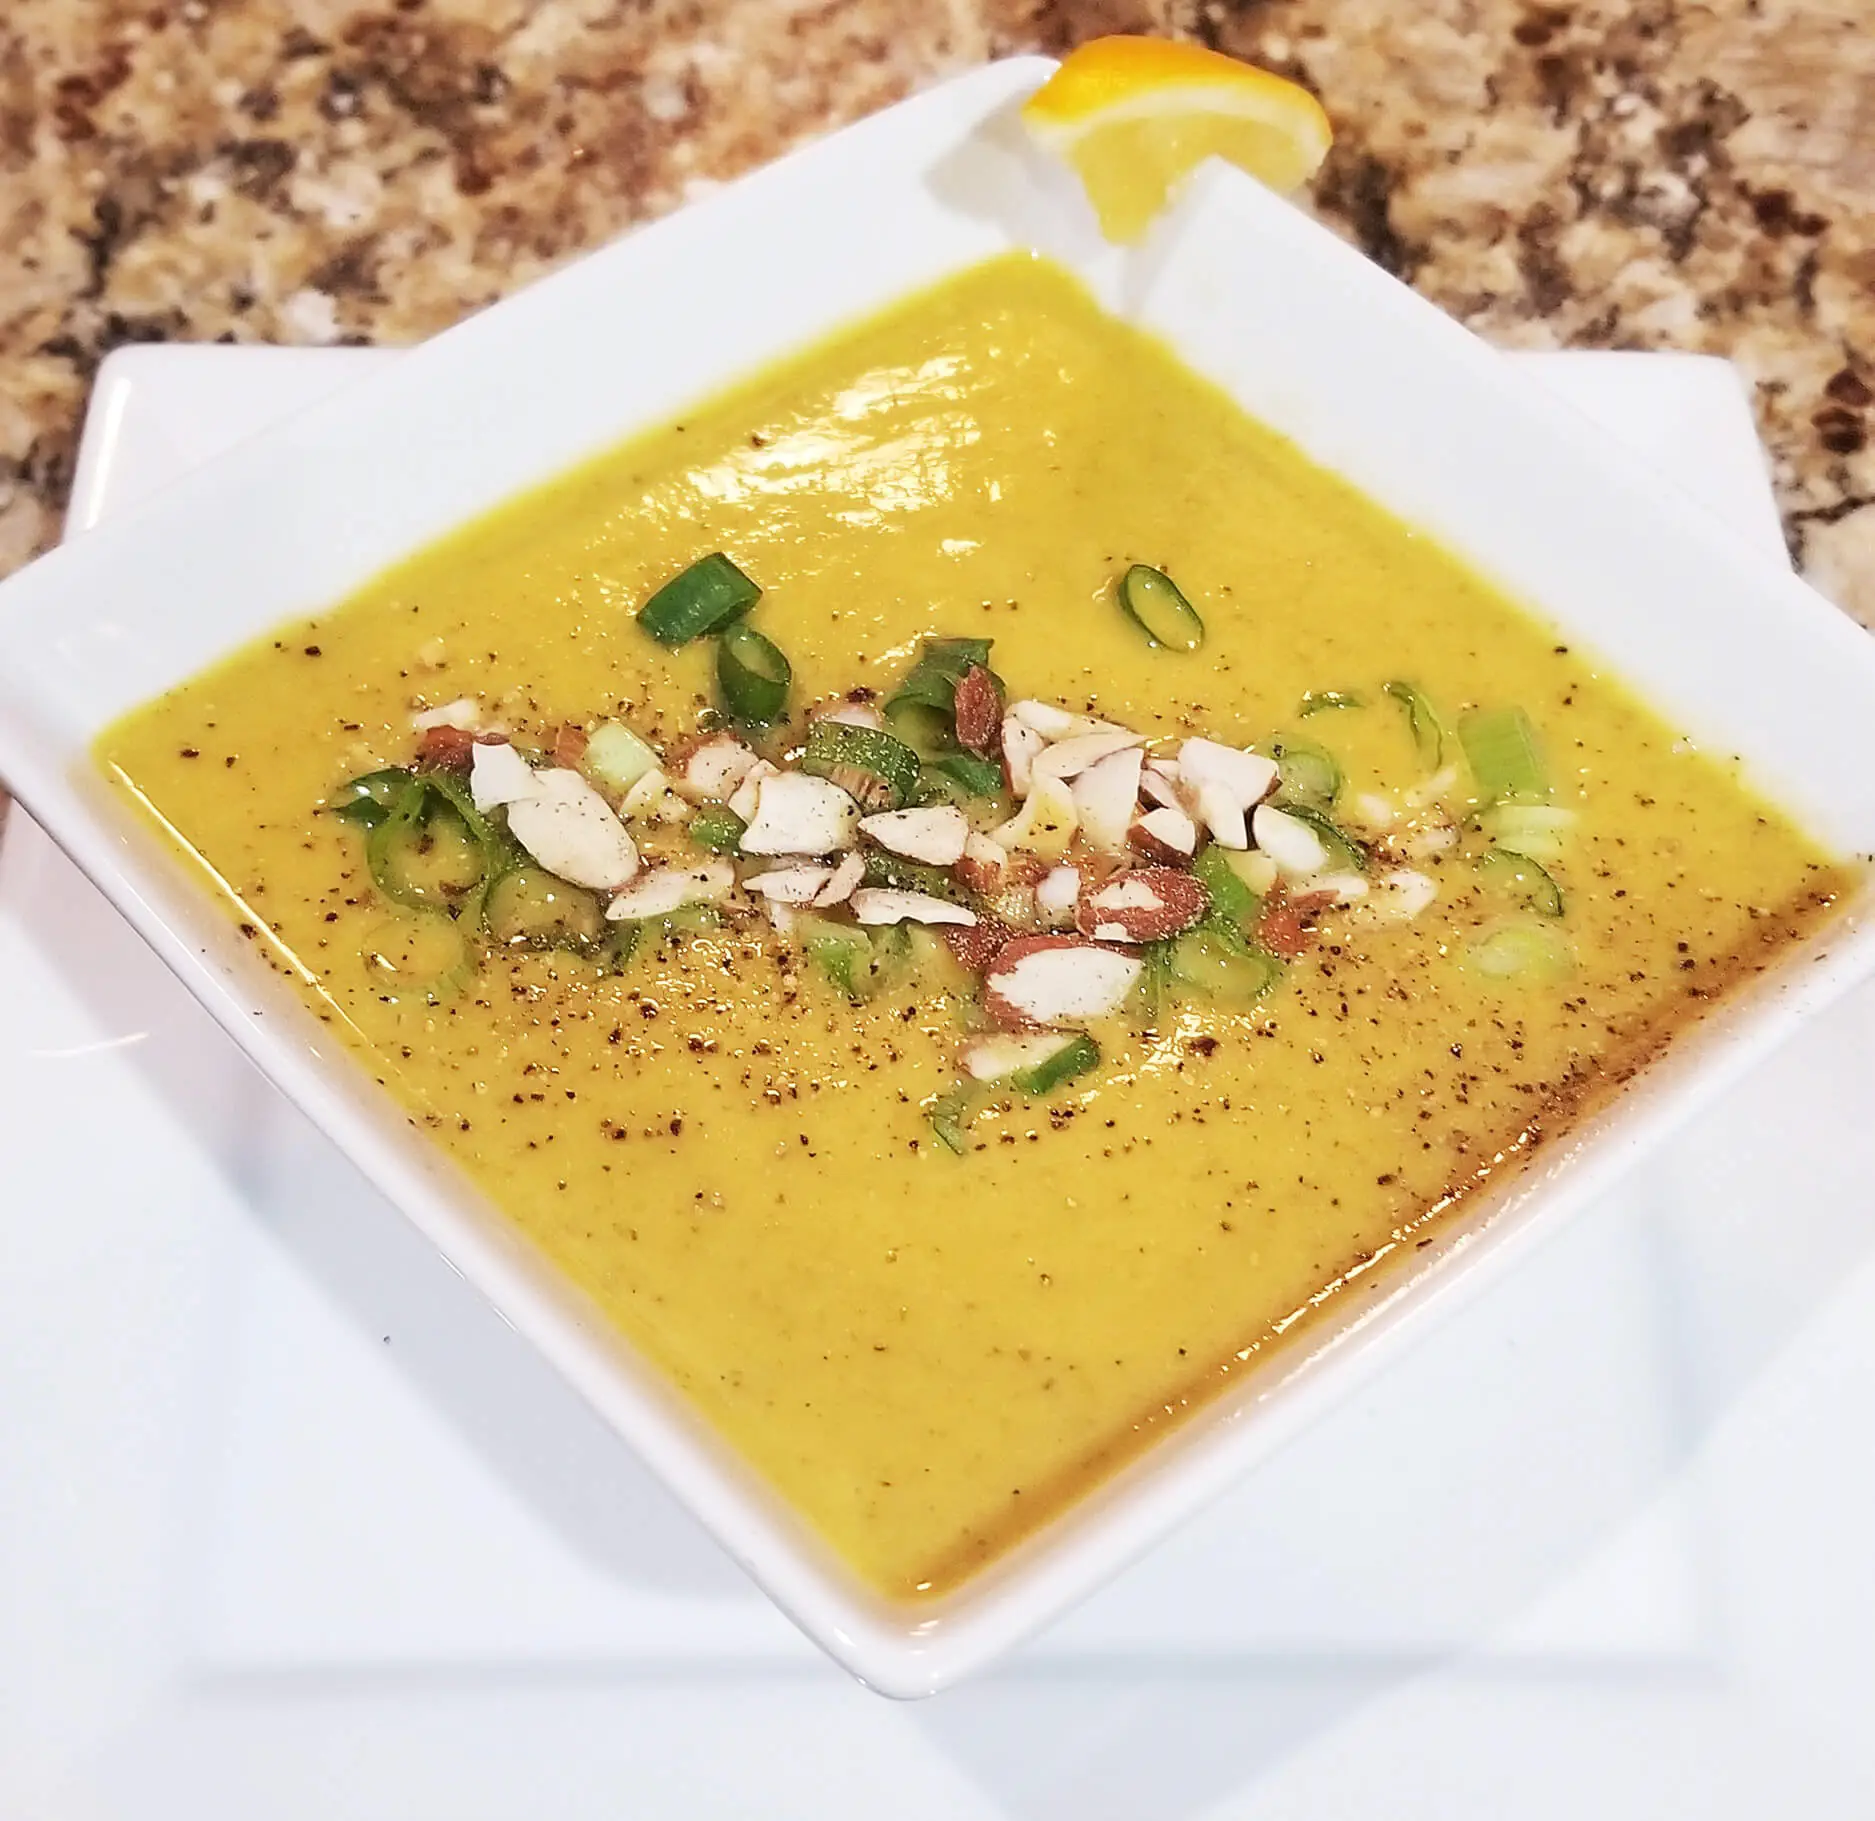 A yellow bowl of soup topped with scallions, almonds and a slice of lemon, offering a delightful blend of flavors and textures